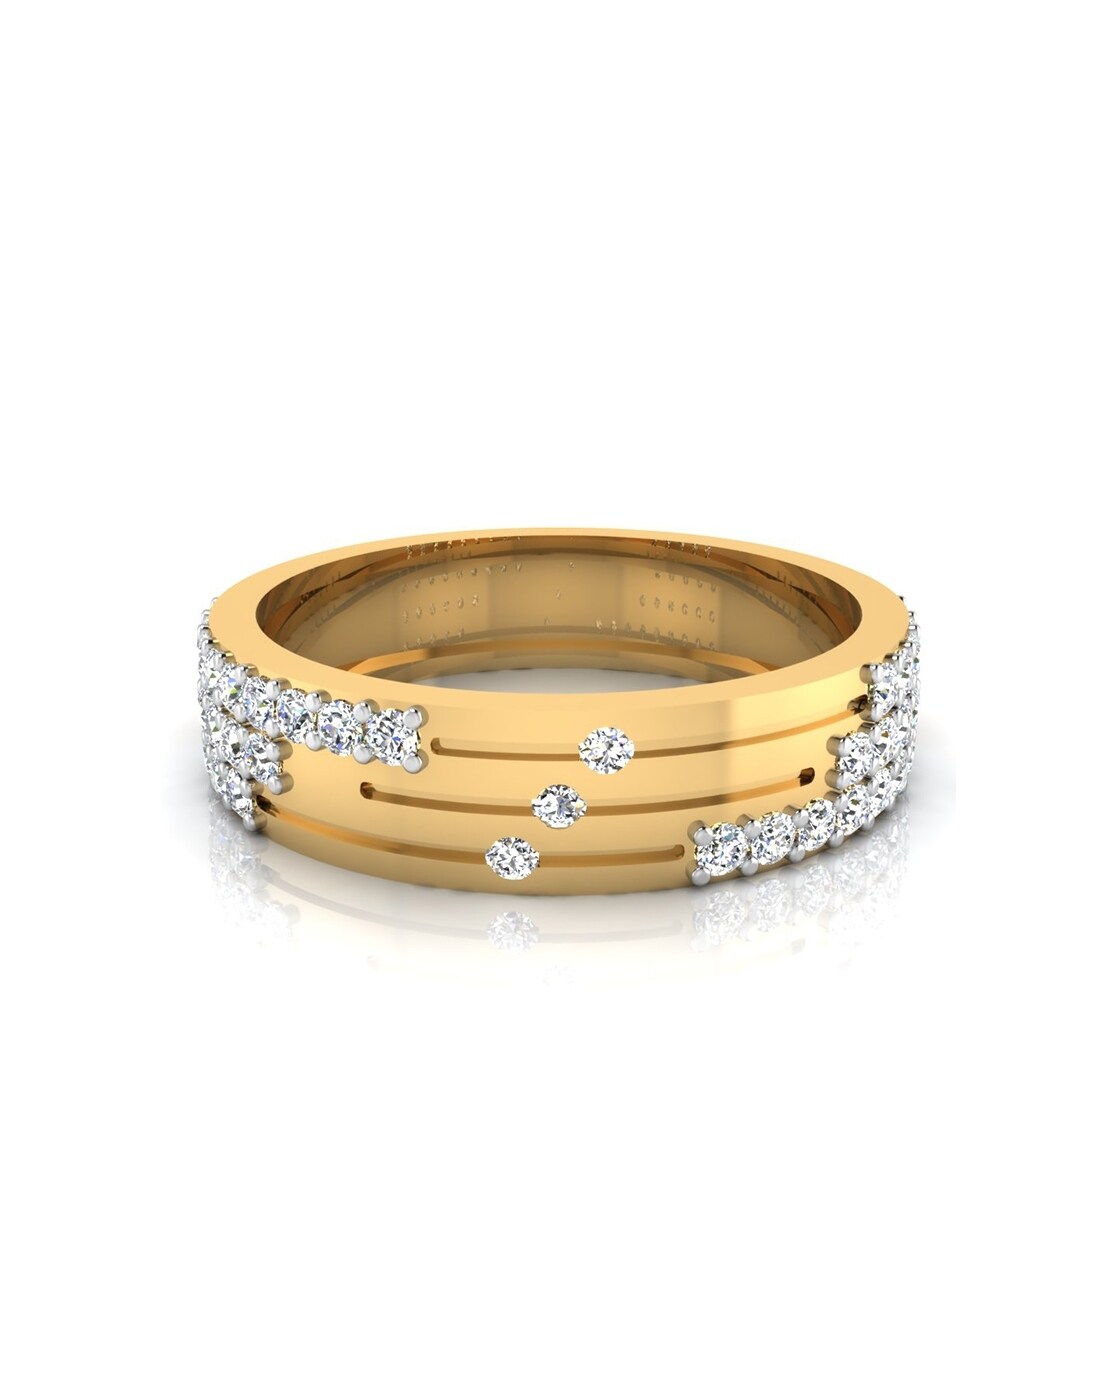 Dotted Ladies Band Ring In 22K Gold With Rhodium | Nemichand Bamalwa & Sons  (J)